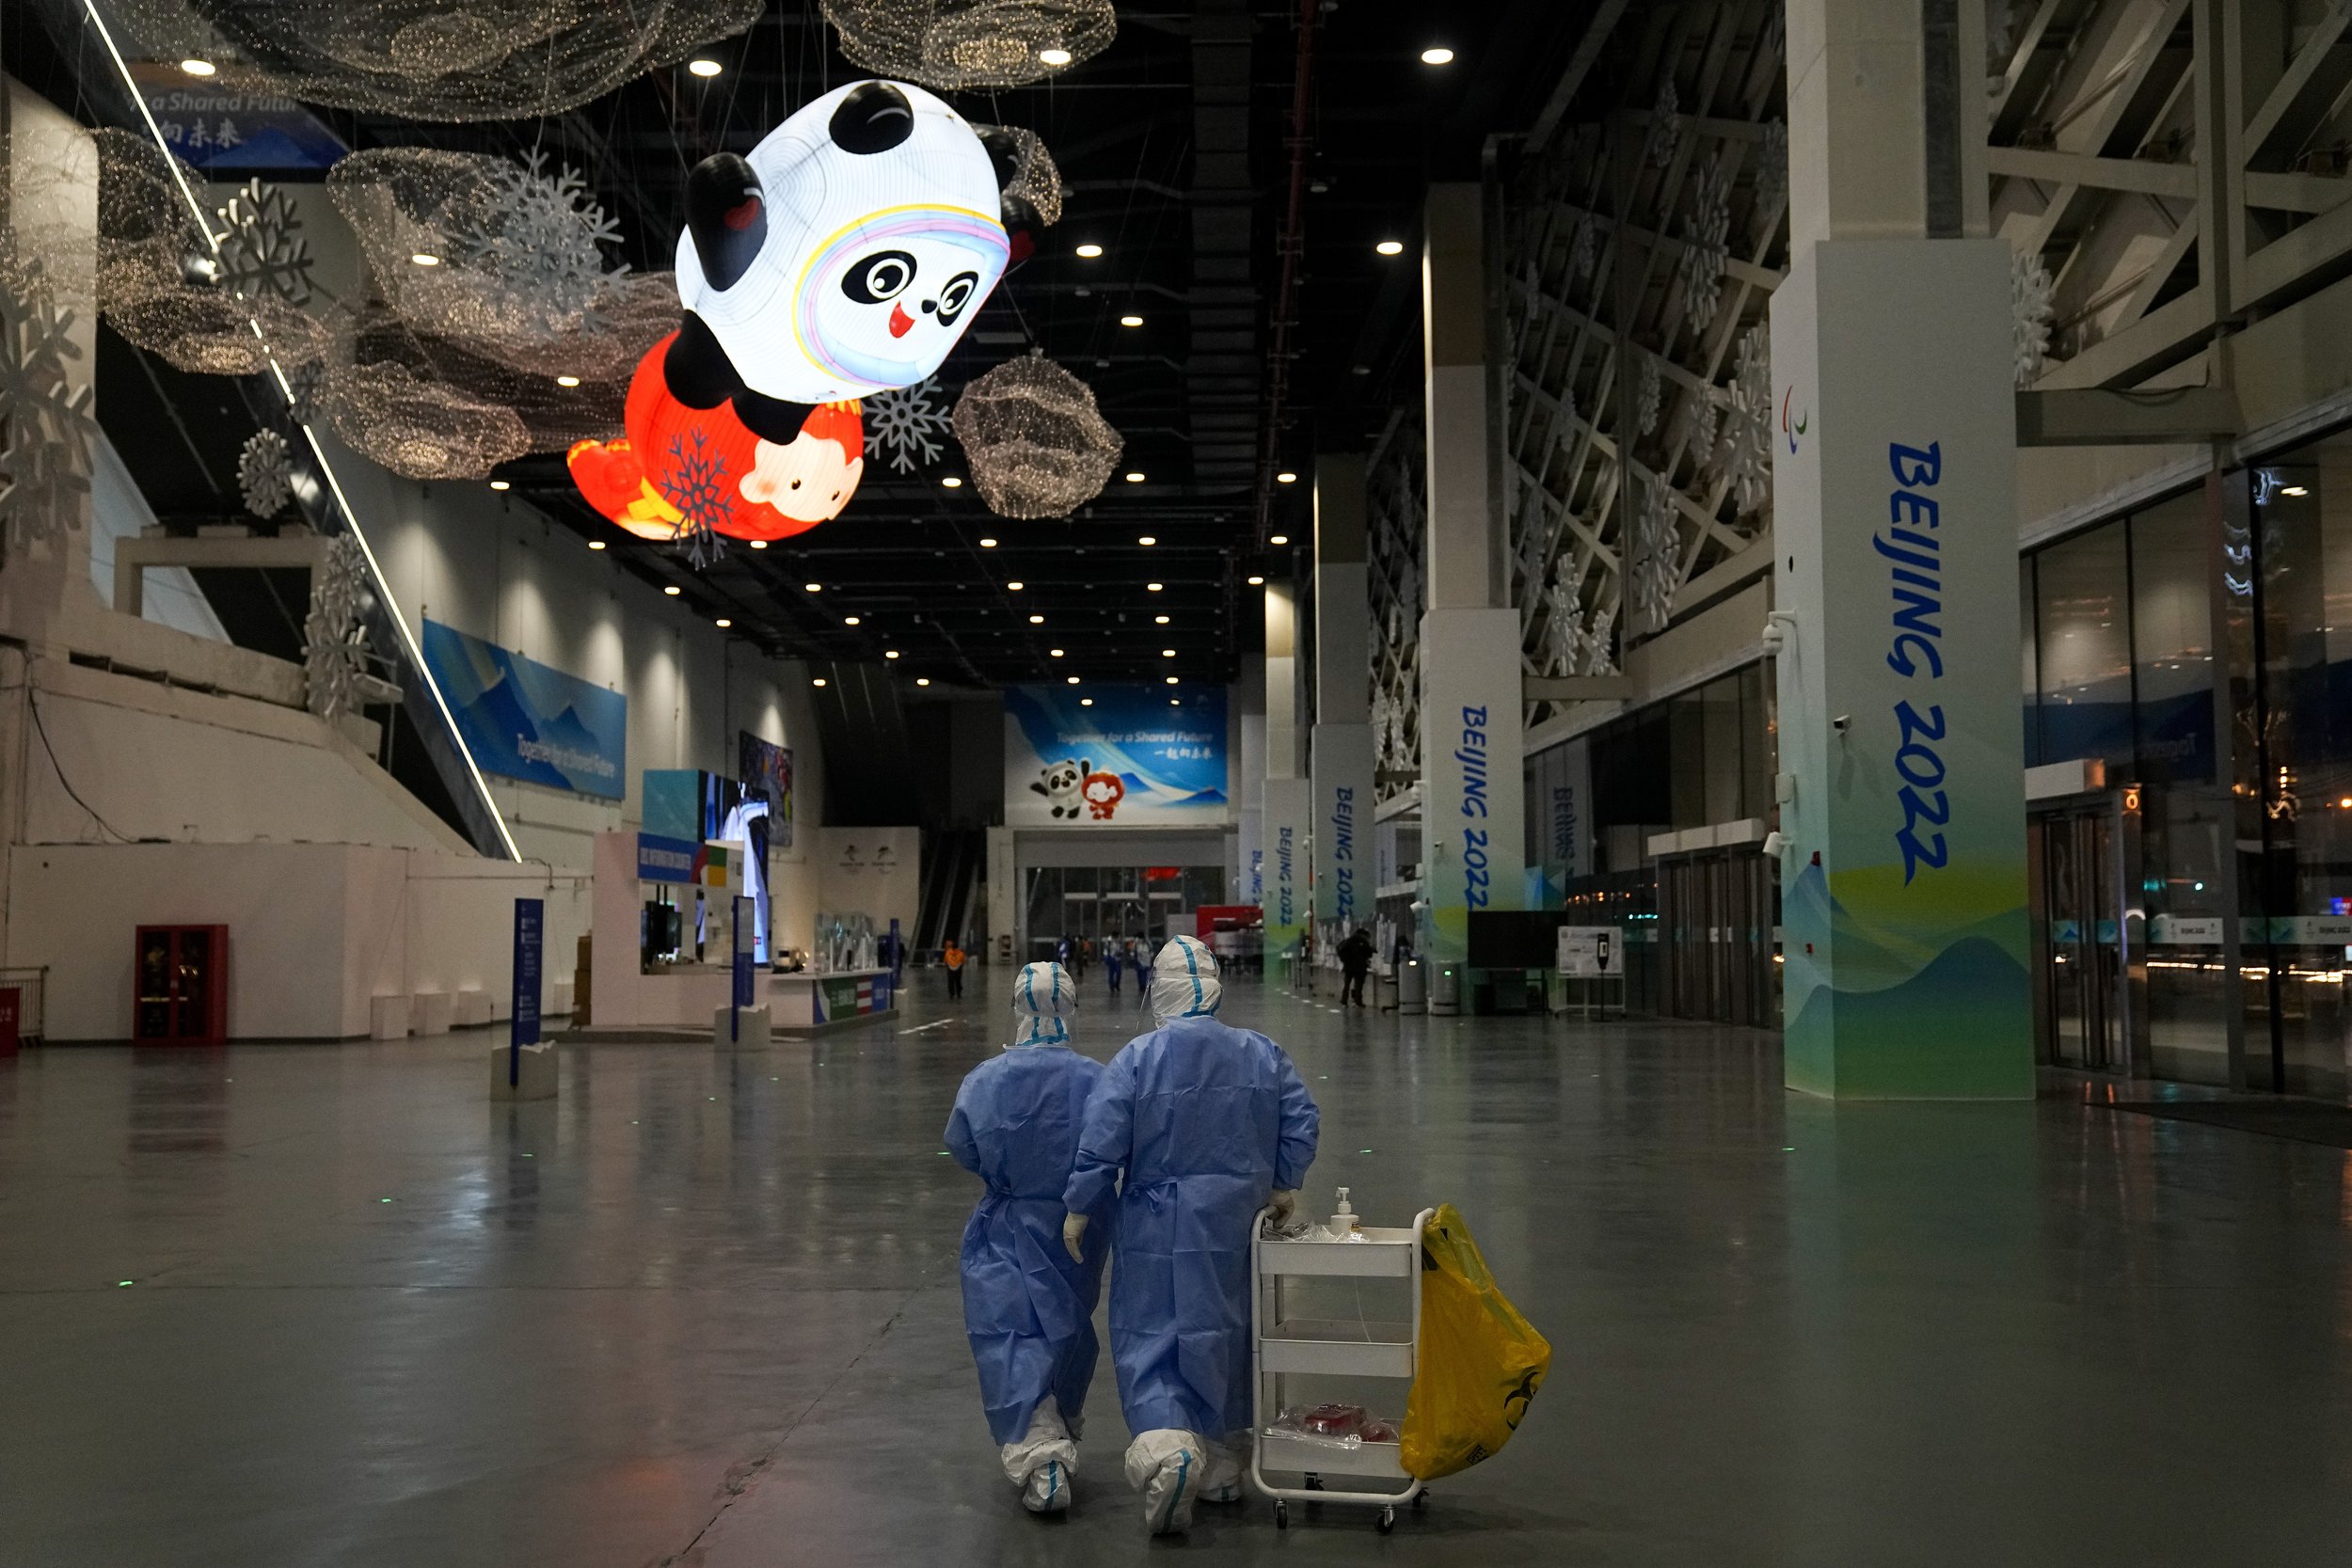  Two medical workers head back to their office after collecting dozens of samples for COVID testing in the main media center at the 2022 Winter Olympics, Friday, Feb. 11, 2022, in Beijing. (AP Photo/Jae C. Hong) 